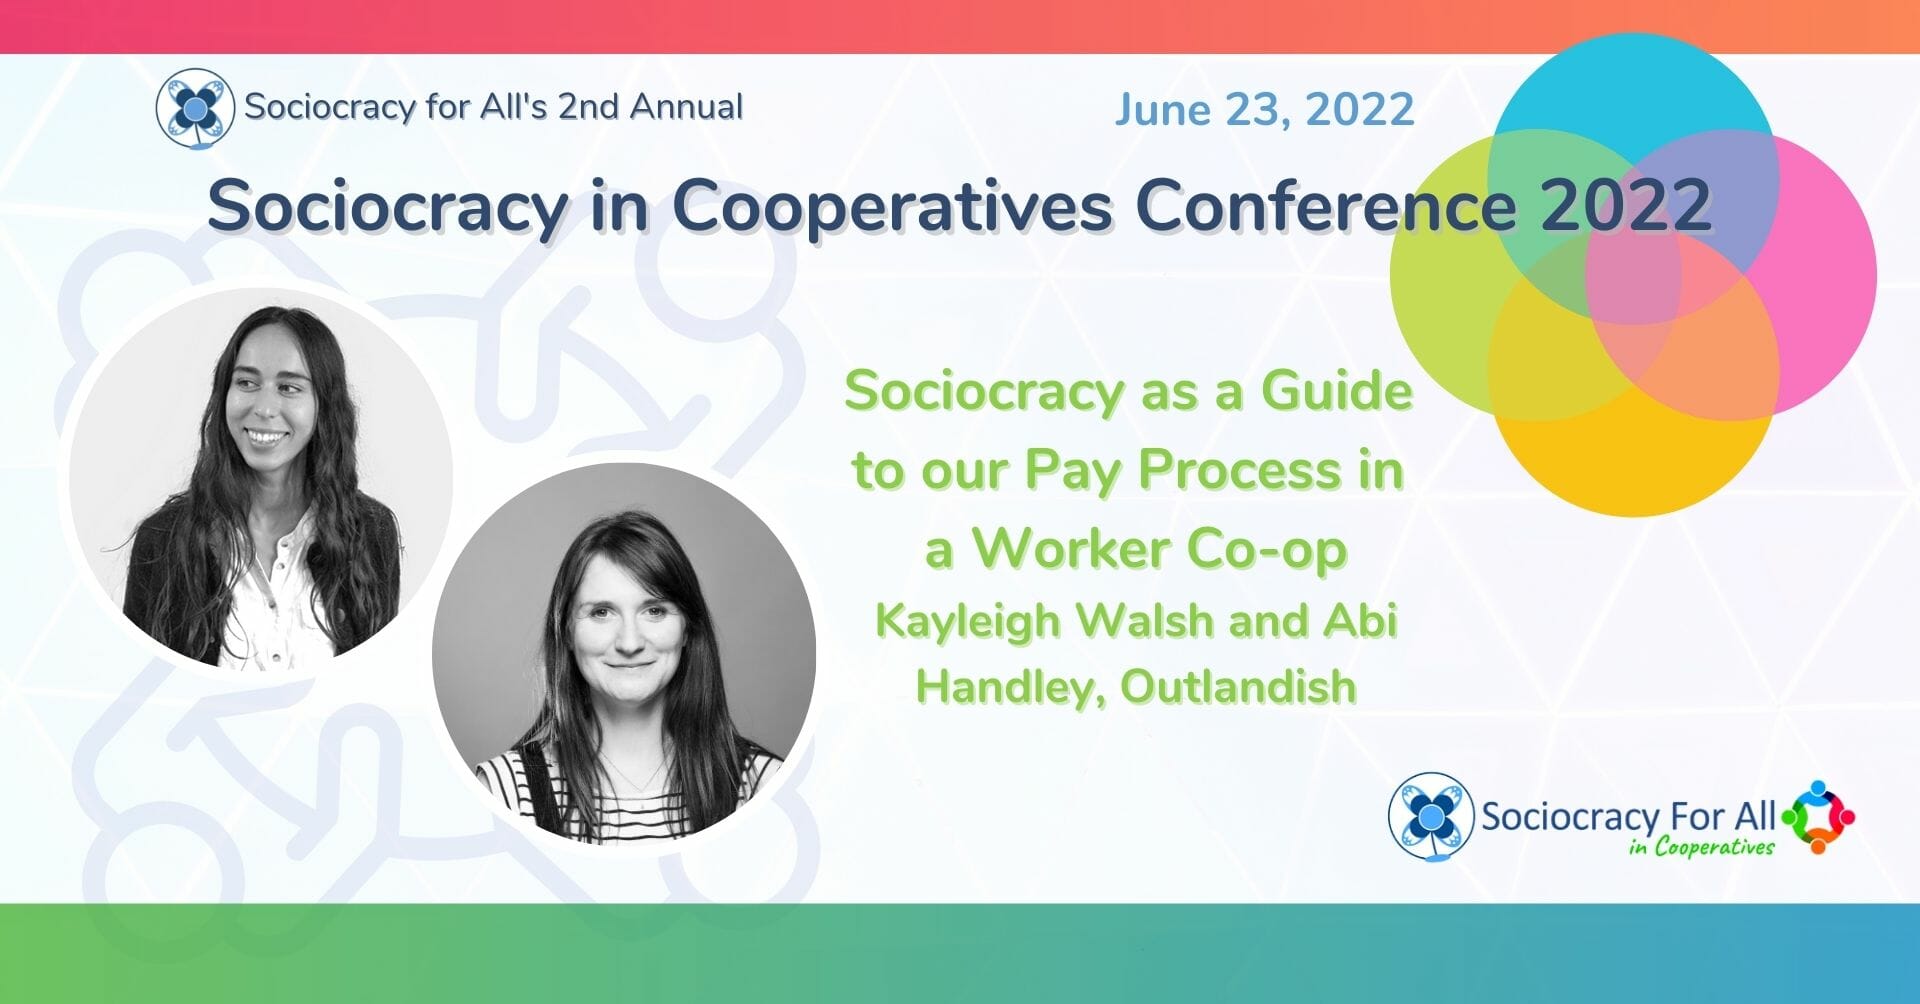 Sociocracy as a Guide to our Pay Process in a Worker Co-op — Kayleigh Walsh and Abi Handley, Outlandish